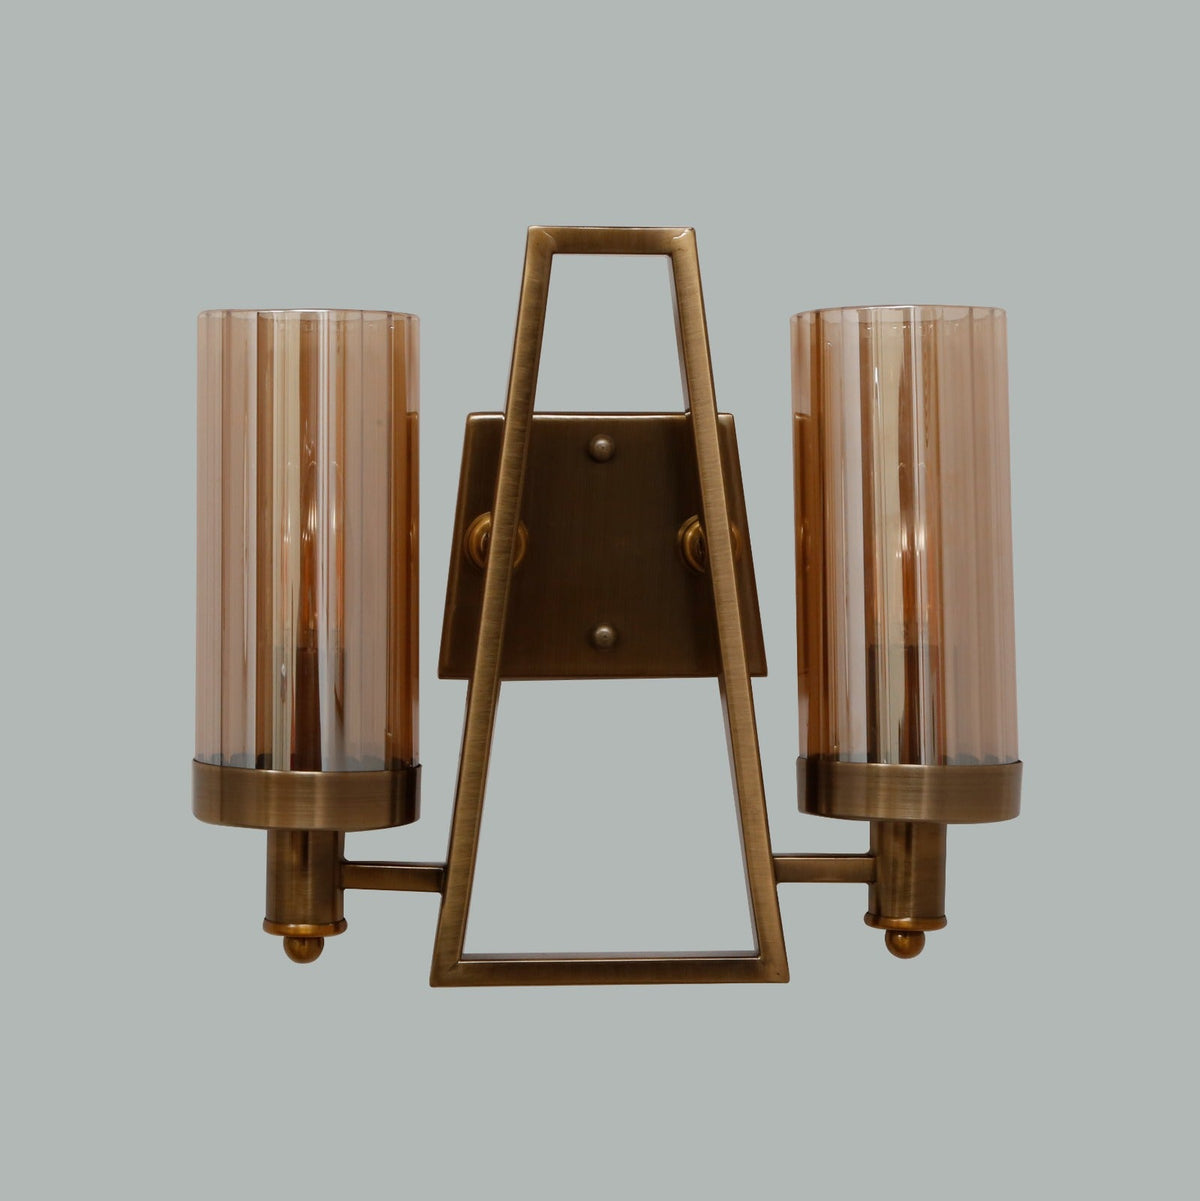 Shop Legacy Double Wall Light online